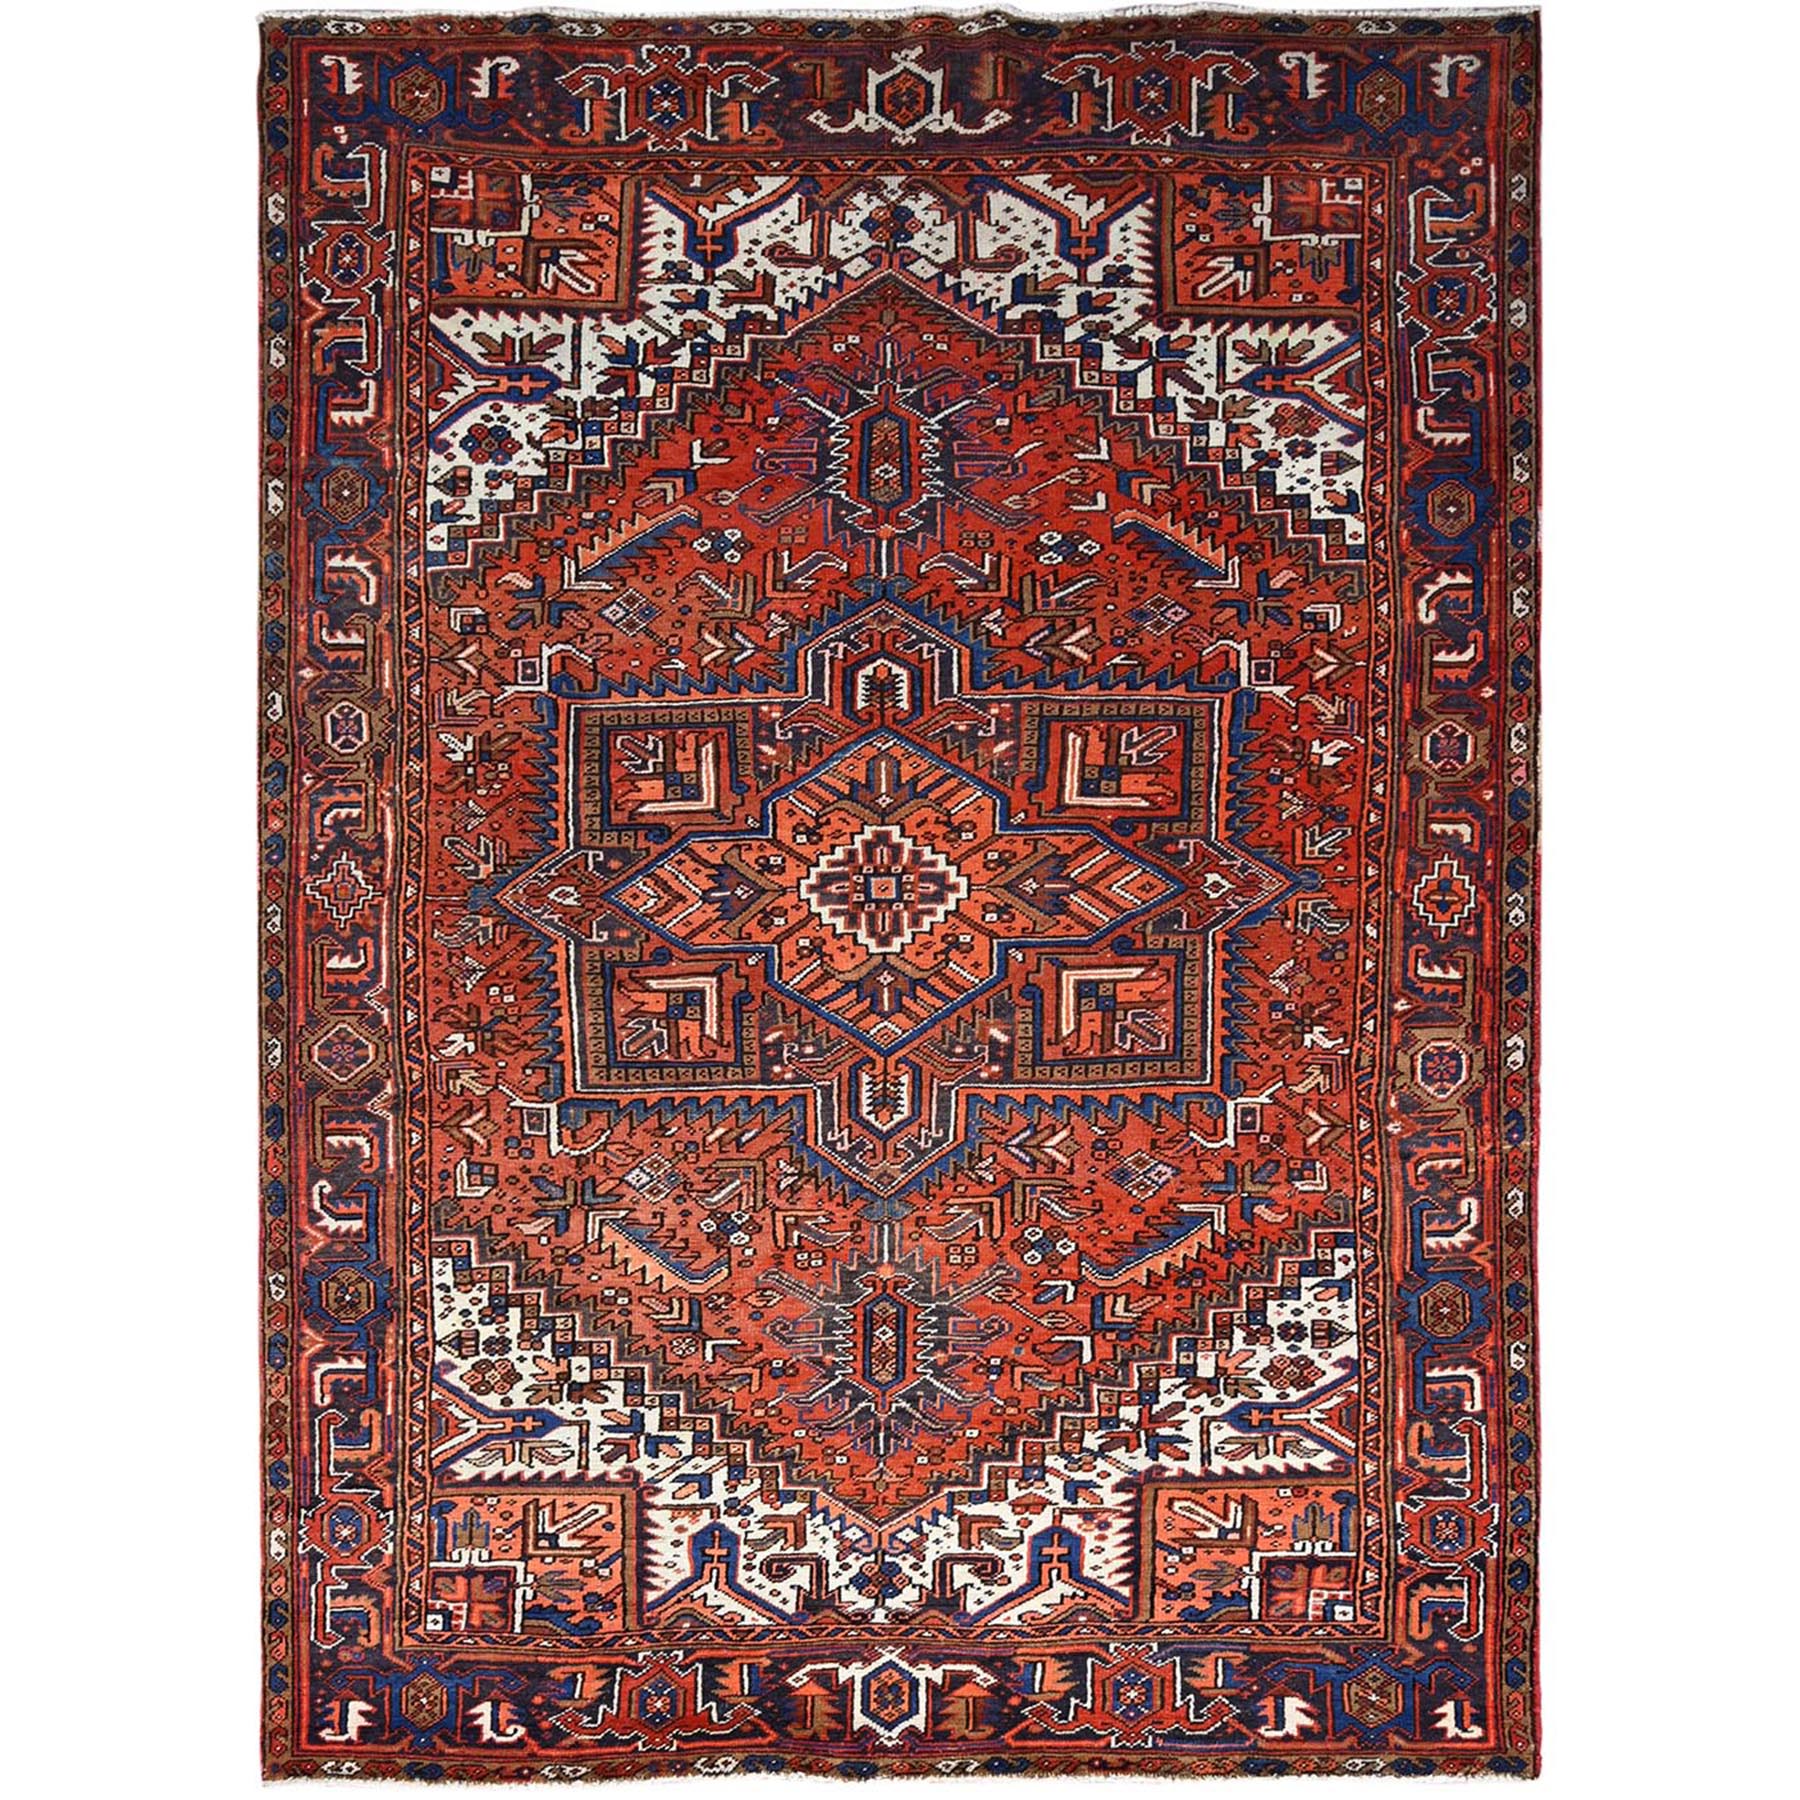  Wool Hand-Knotted Area Rug 7'7